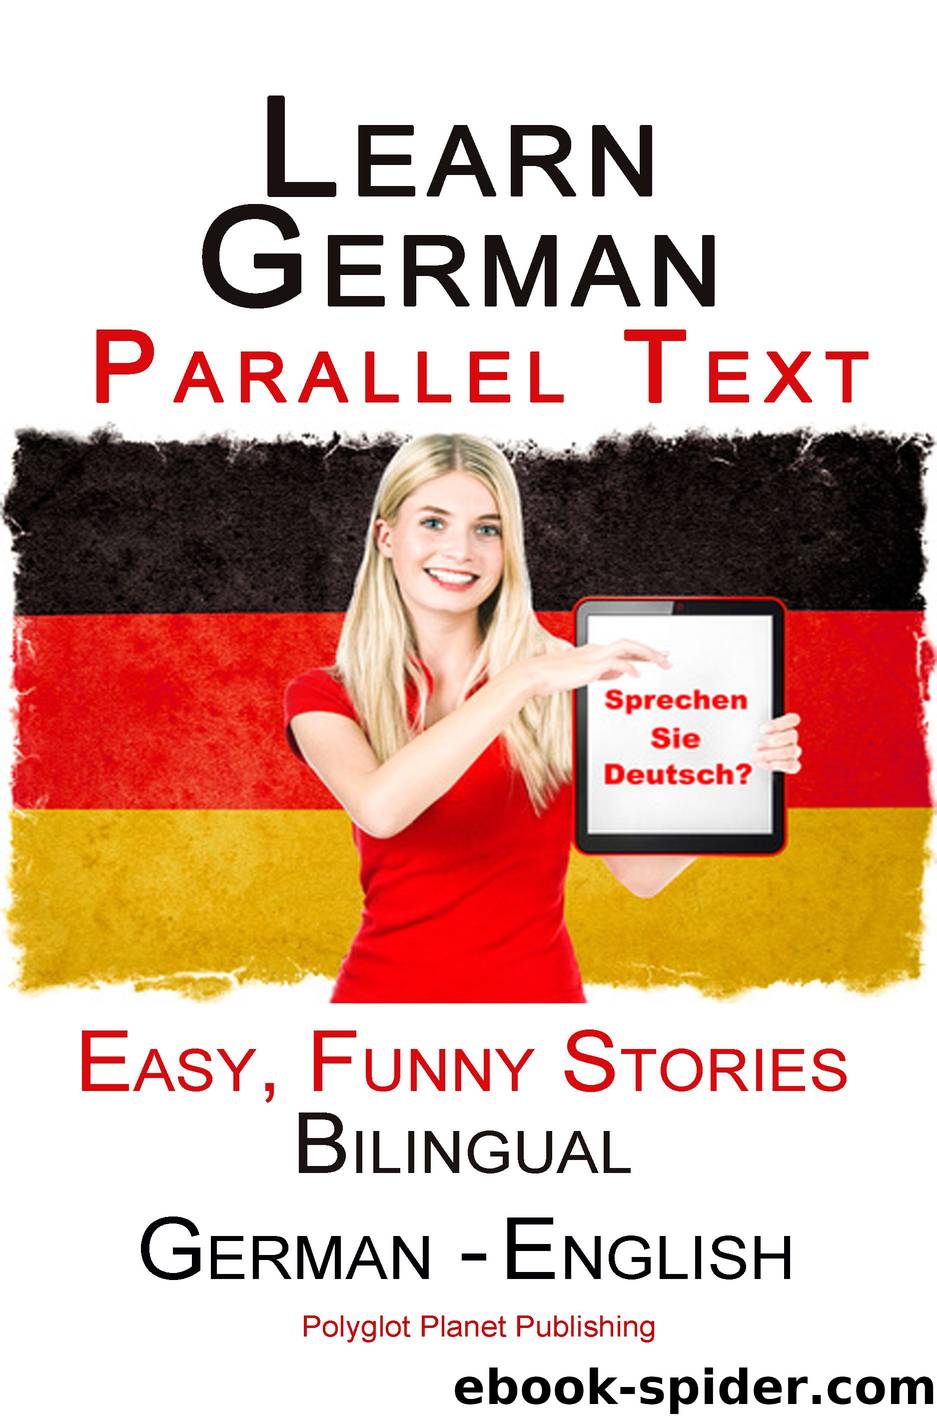 Learn German--Parallel Text-- Easy, Funny Stories (English--German) Bilingual by Polyglot Planet Publishing